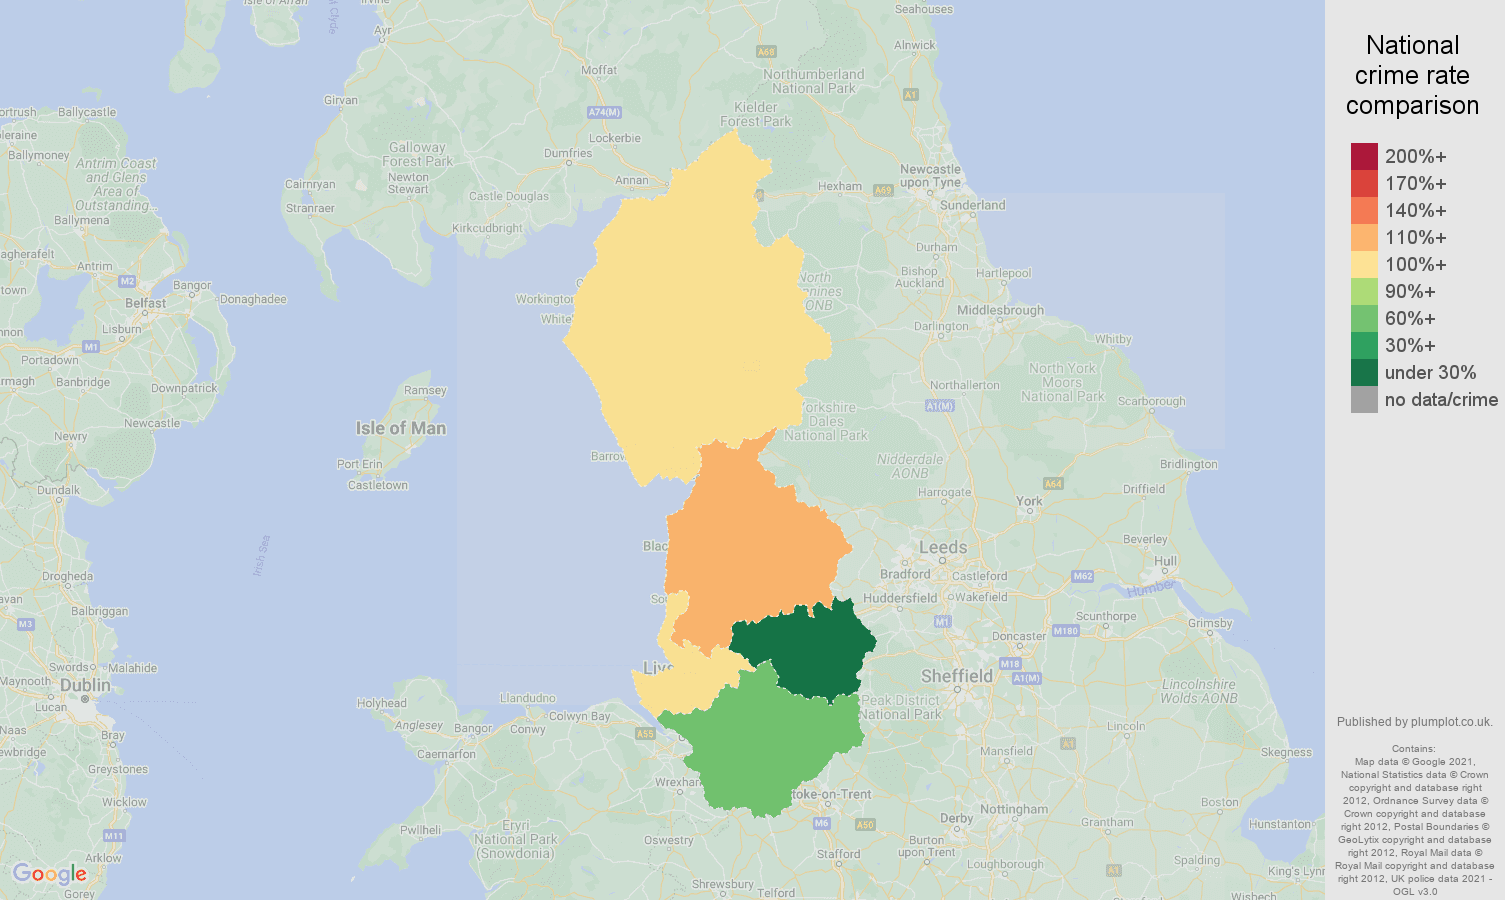 North West possession of weapons crime rate comparison map